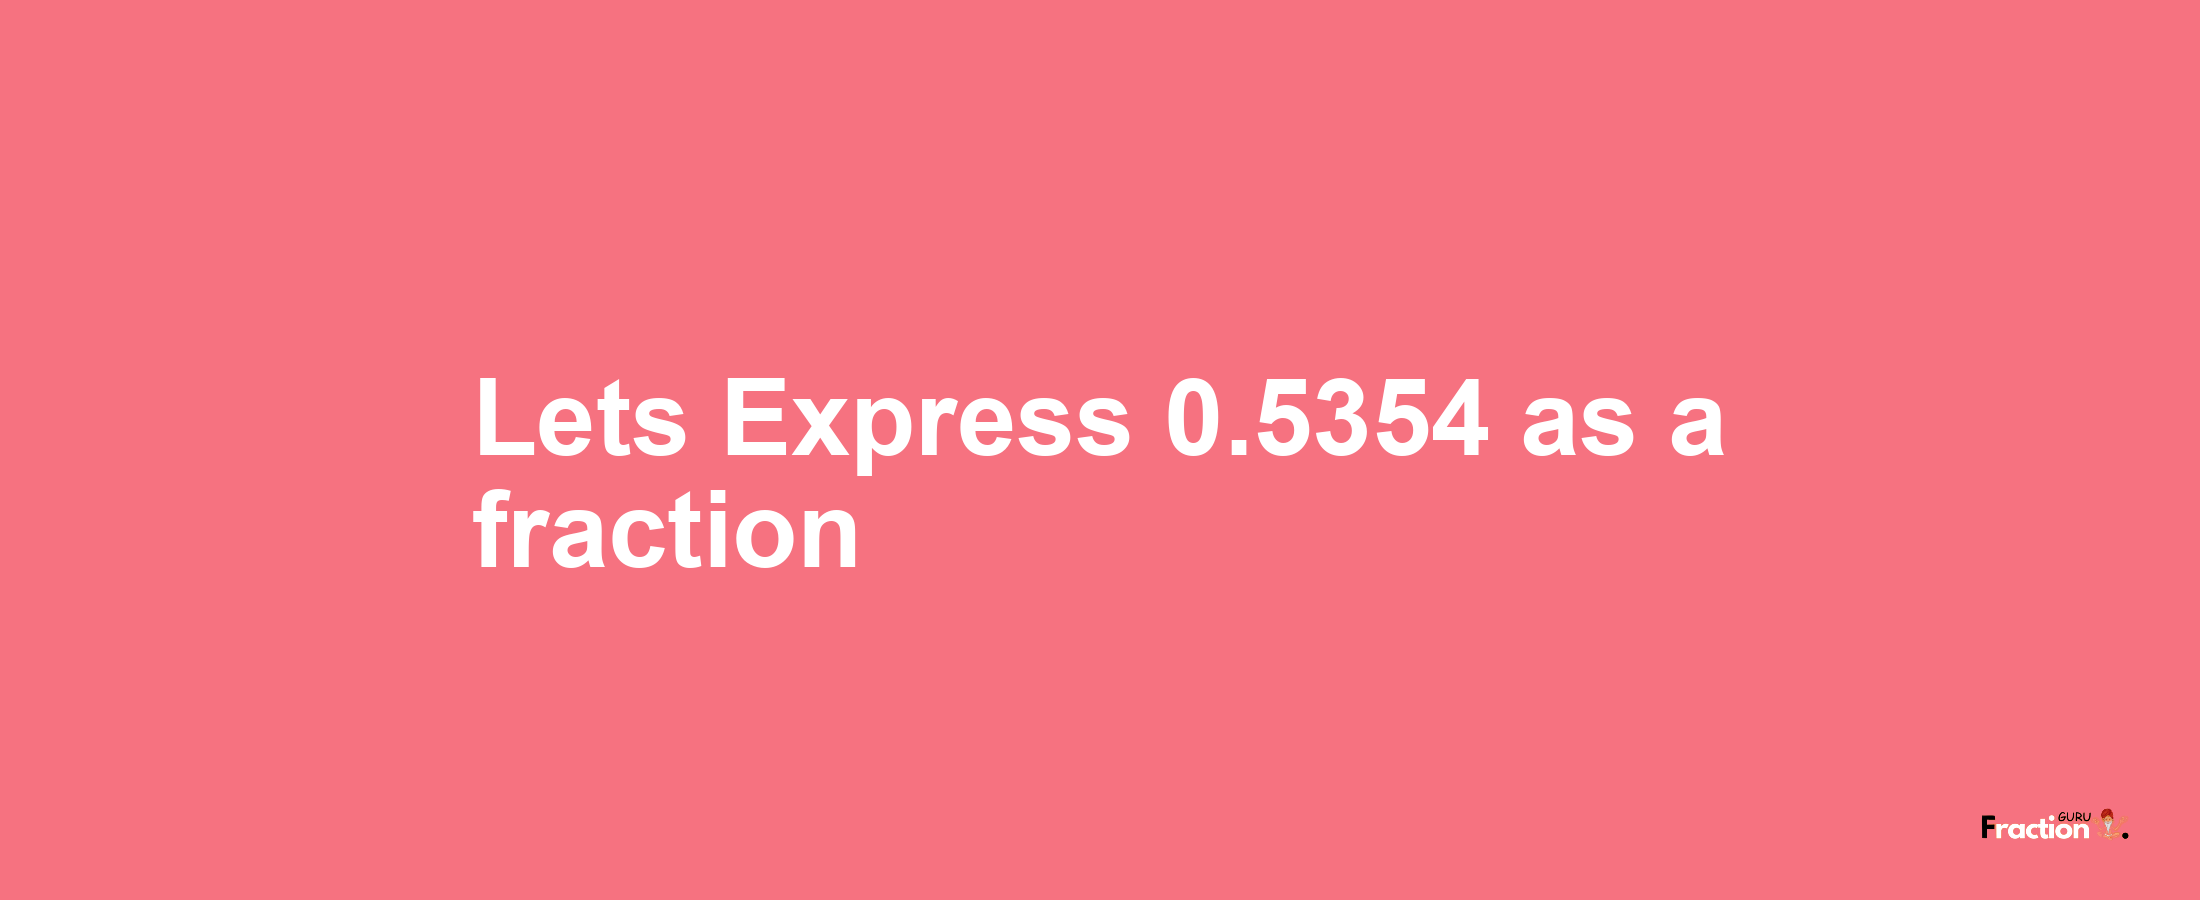 Lets Express 0.5354 as afraction